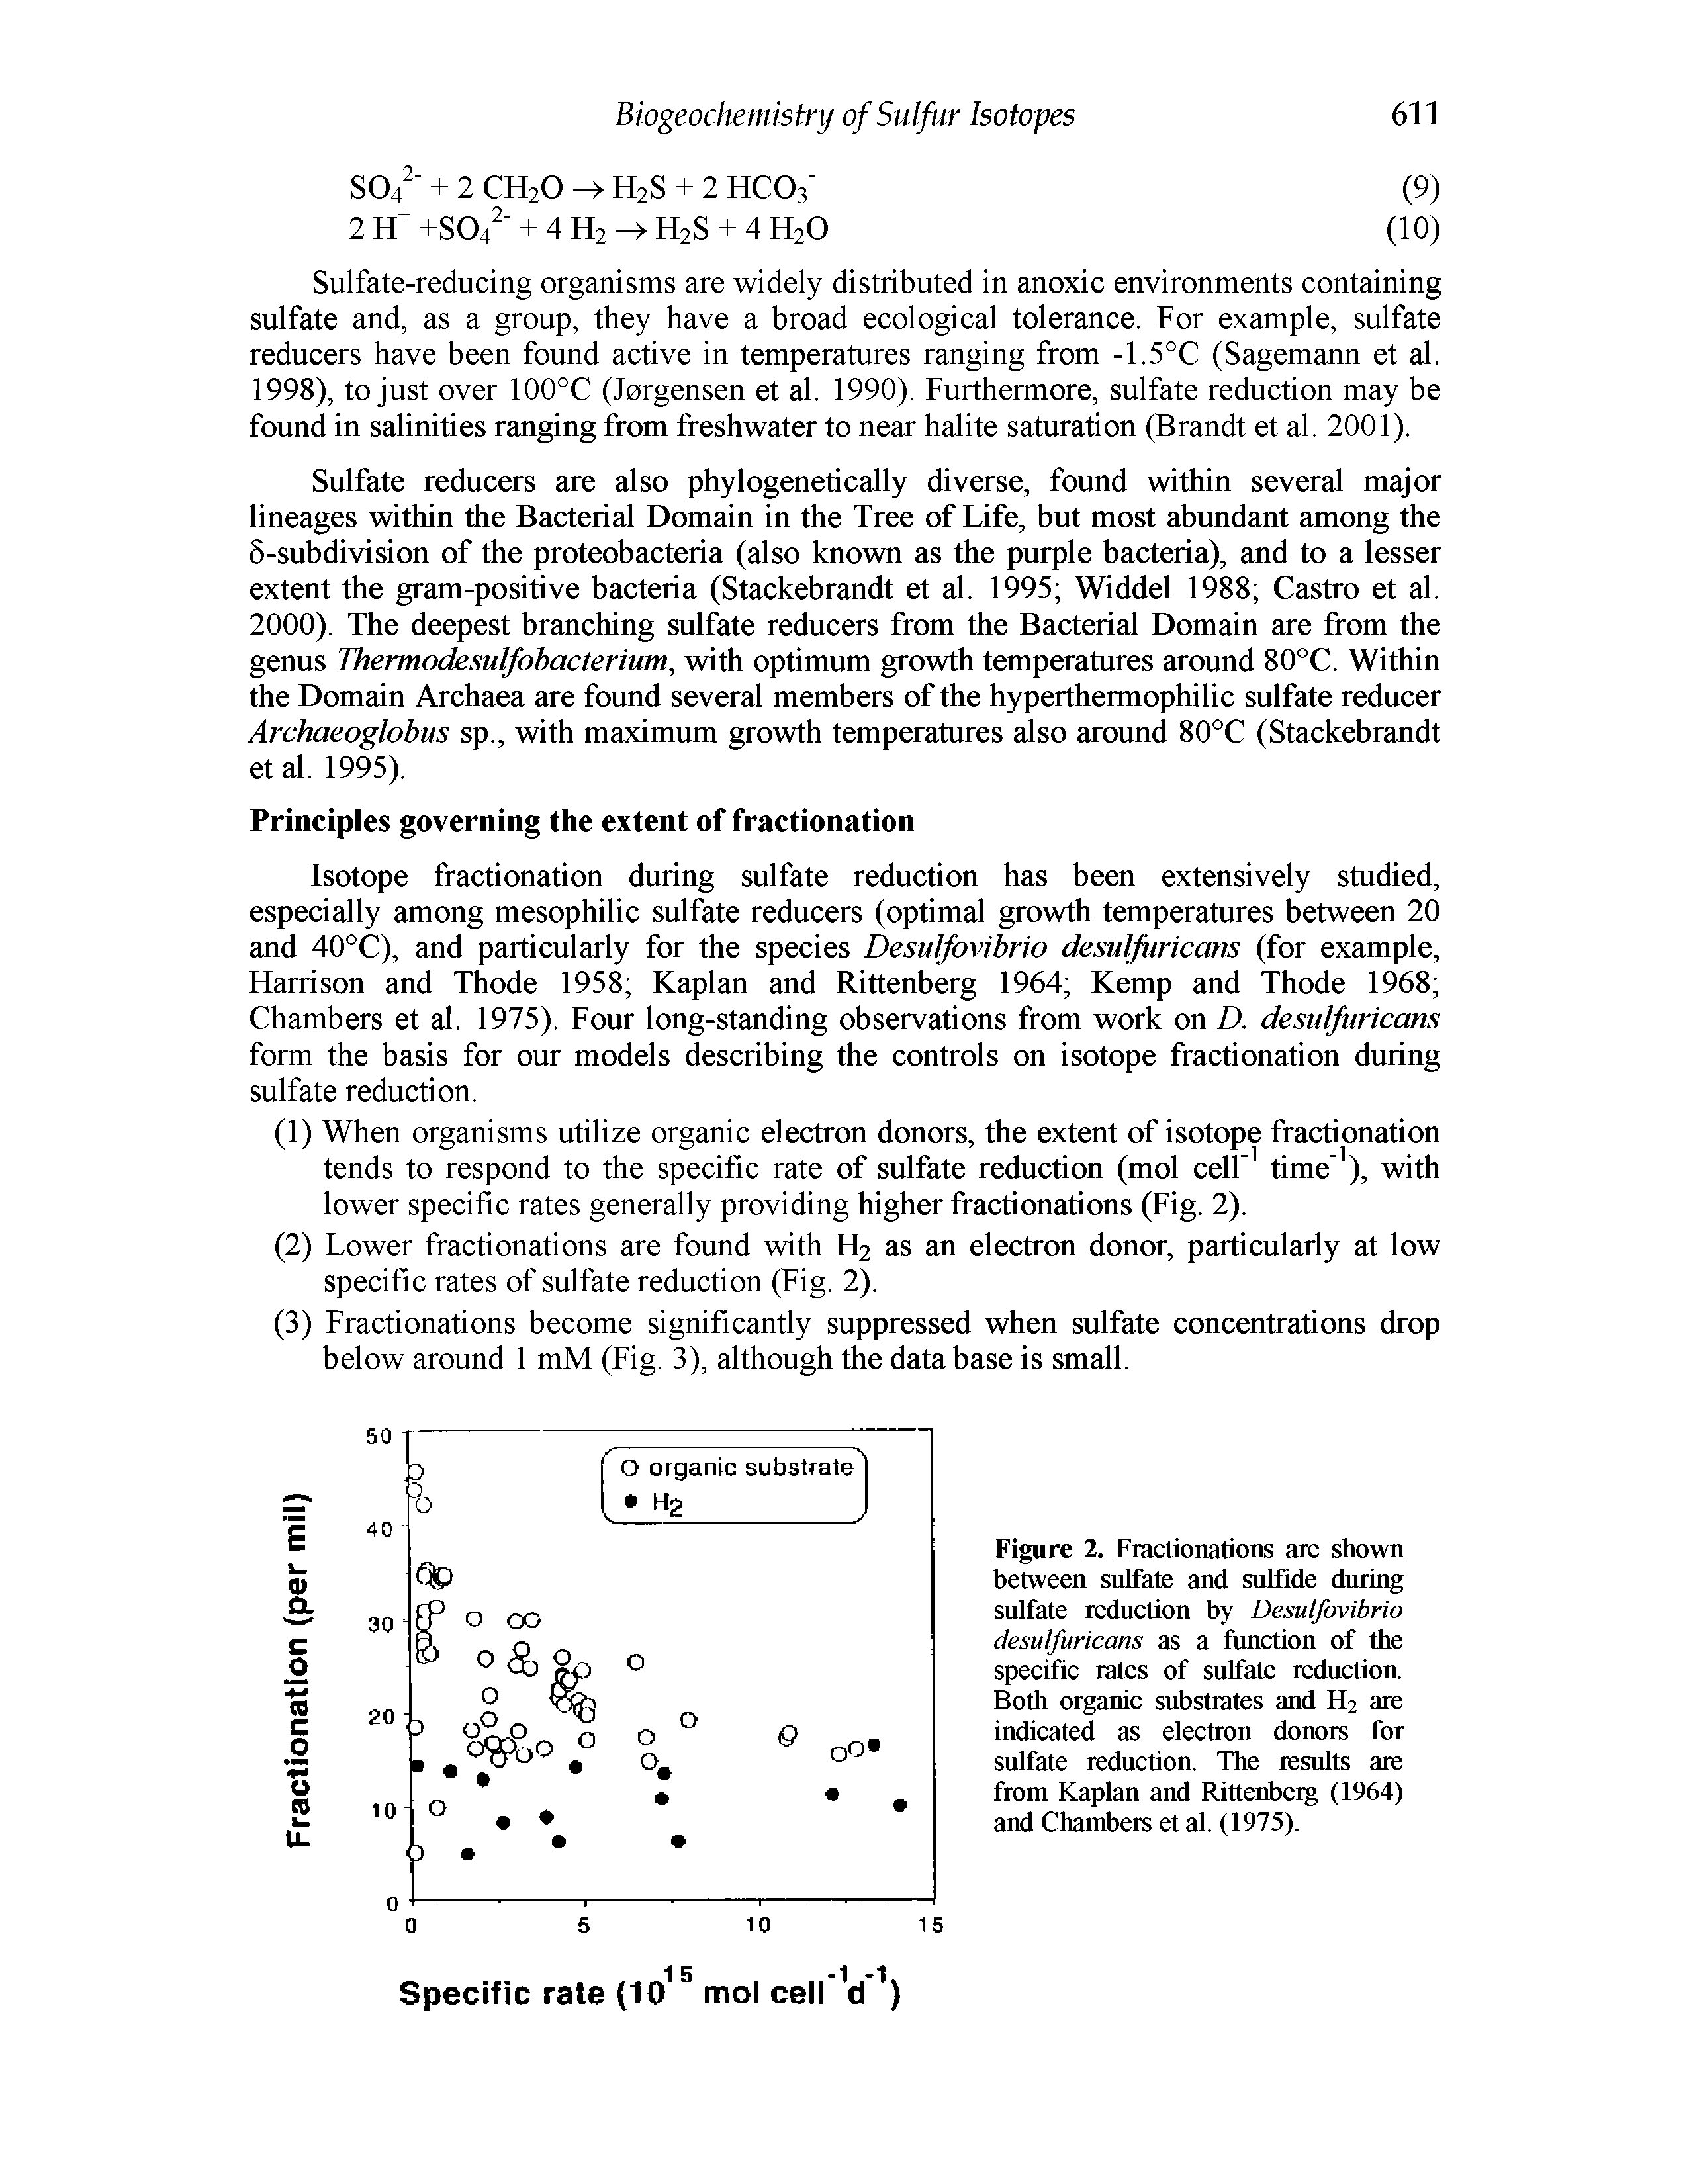 Figure 2. Fractionations are shown between sulfate and sulfide during sulfate reduction by Desulfovibrio desulfuricans as a function of the specific rates of sulfate reduction Both organic substrates and H2 are indicated as electron donors for sulfate reduction. The results ate from Kaplan and Rittenberg (1964) and Chambers et al. (1975).